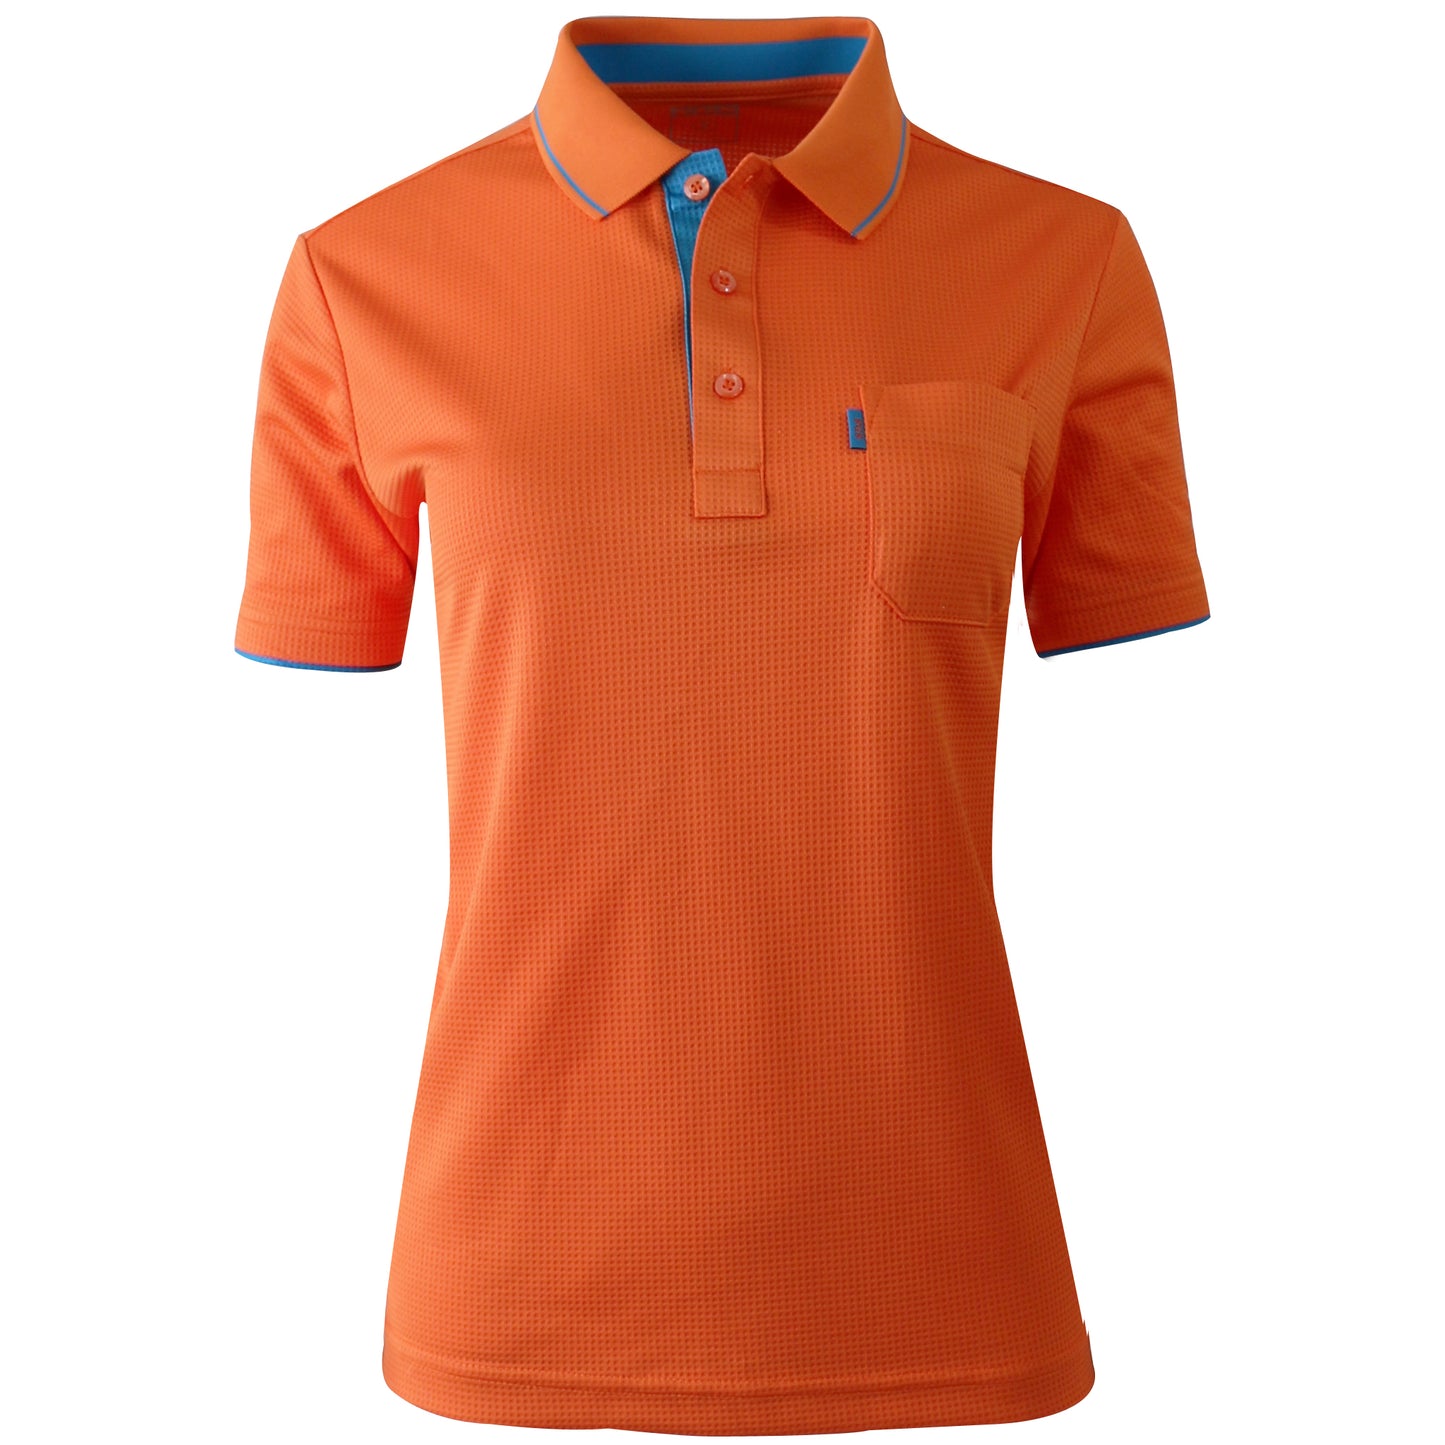 Coolon Tech Dri Cool Collared Lined Polo Shirt(6colors)